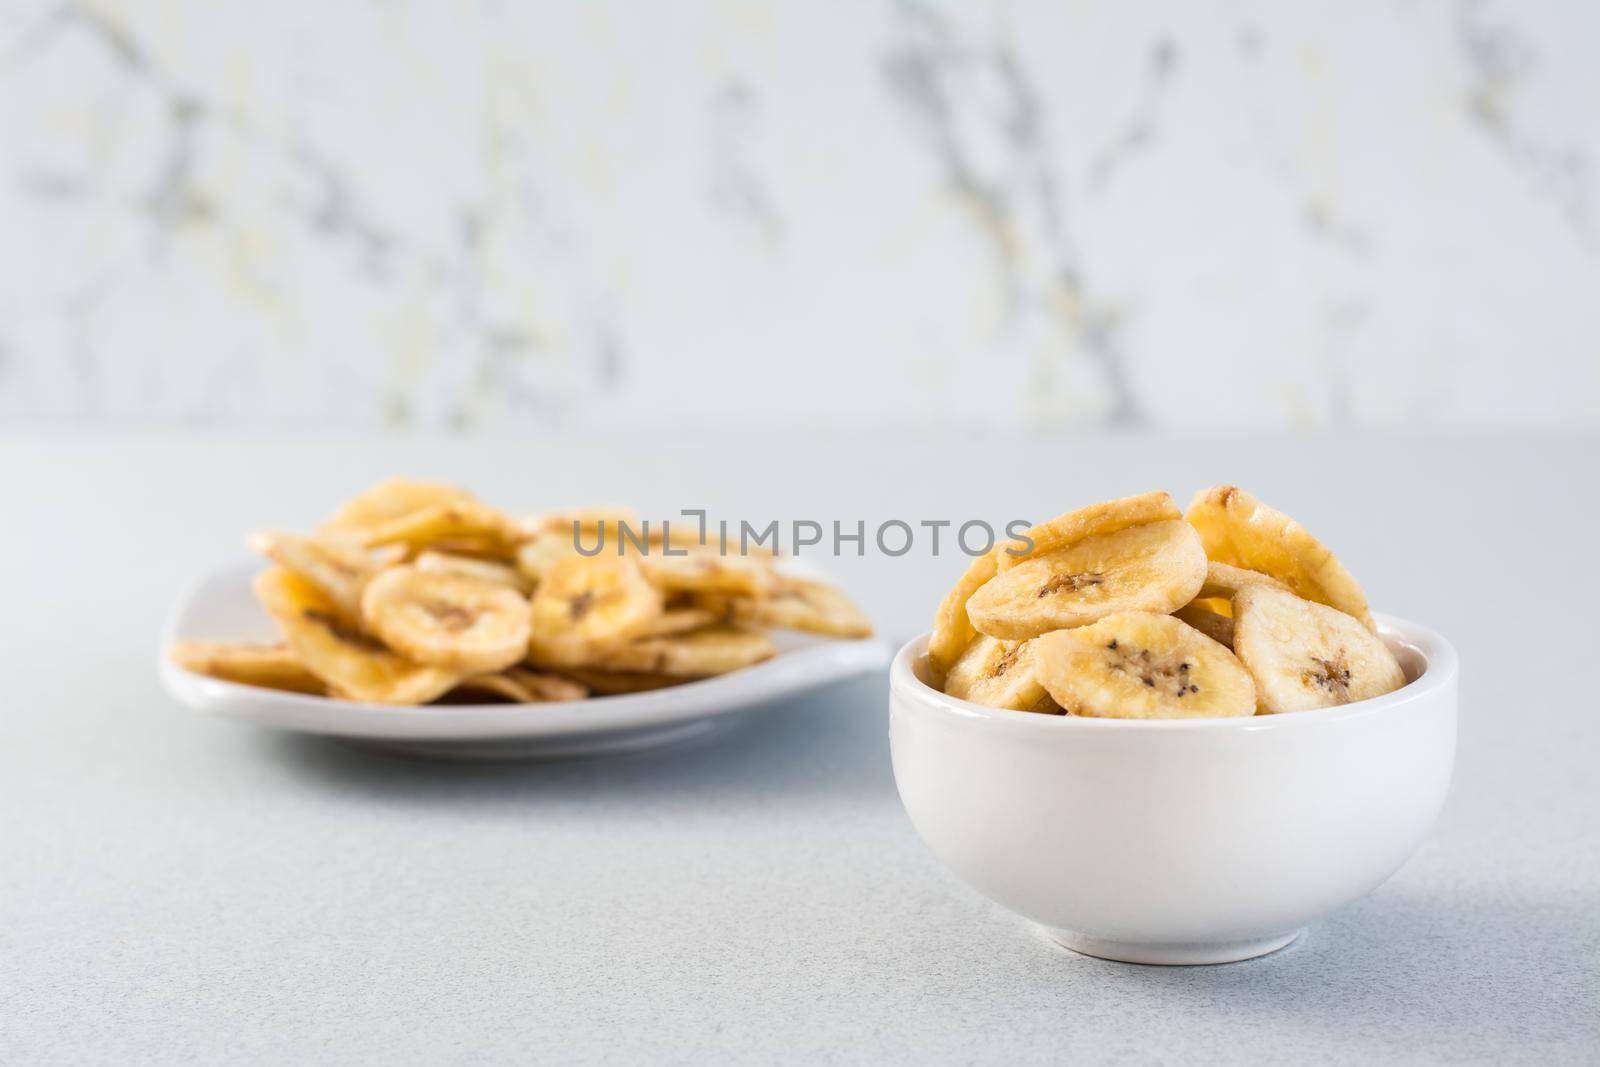 Baked banana chips in a white bowl and saucer on the table. Fast food. Copy space